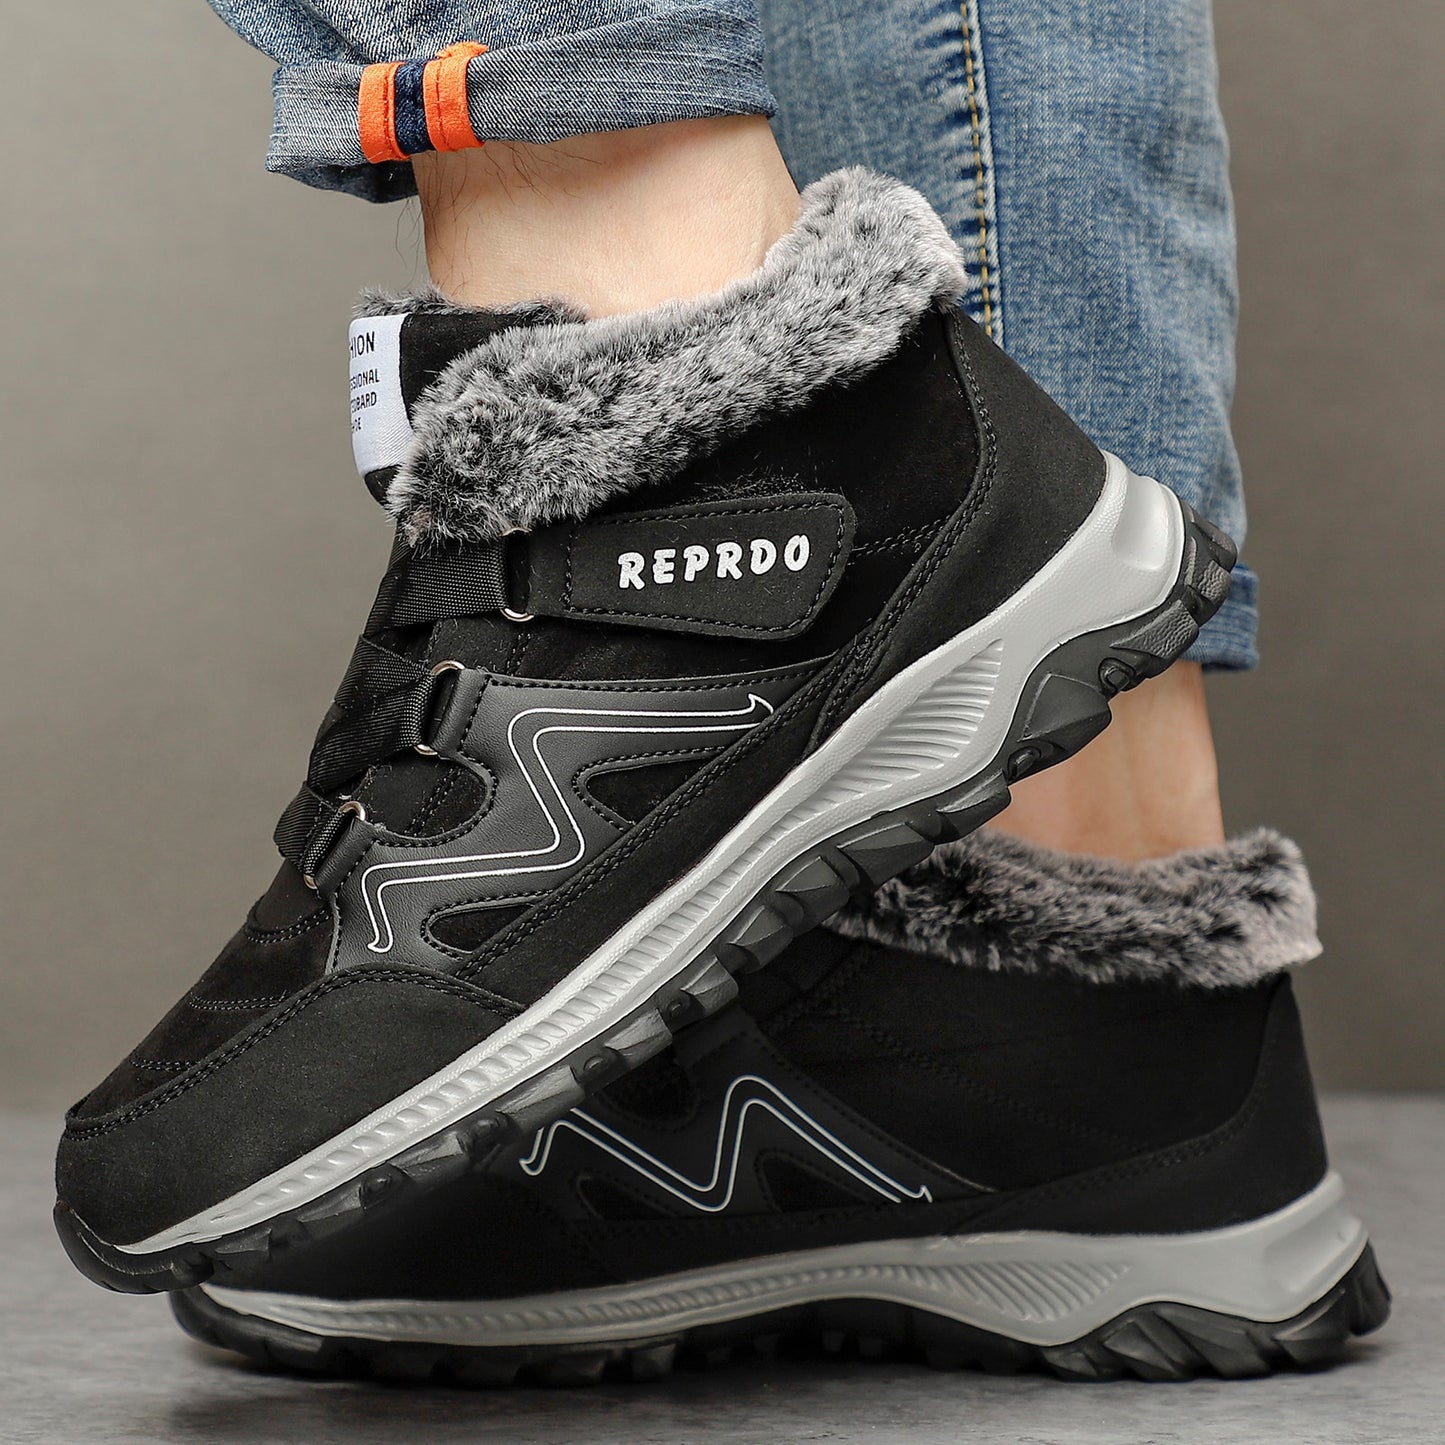 Spring Respro Fashion Sneakers